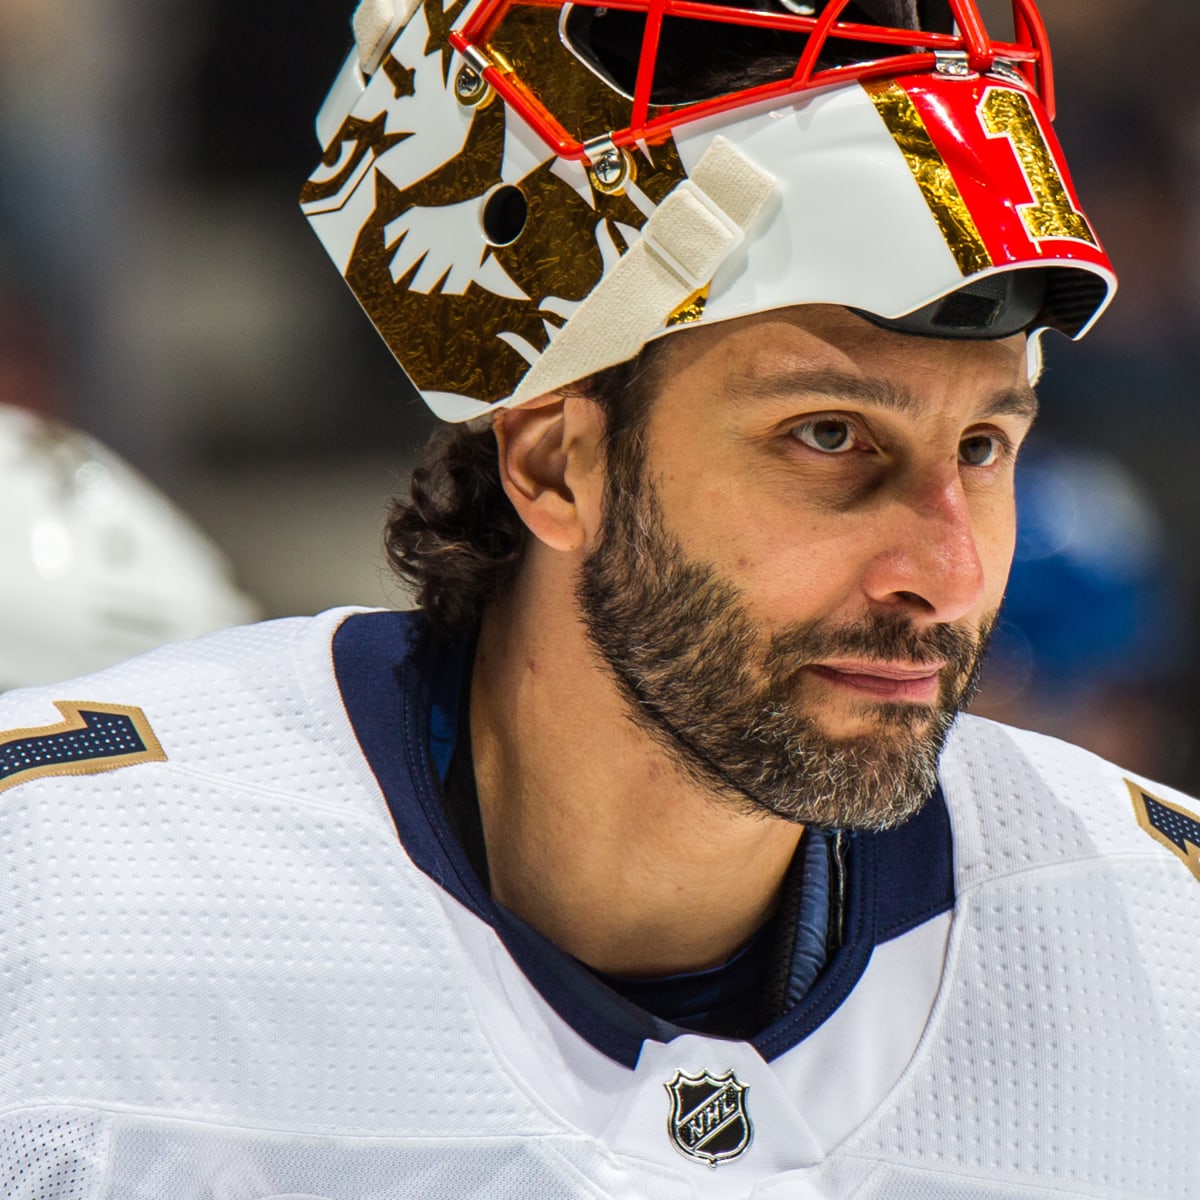 Roberto Luongo to become 1st Panthers player to have jersey retired